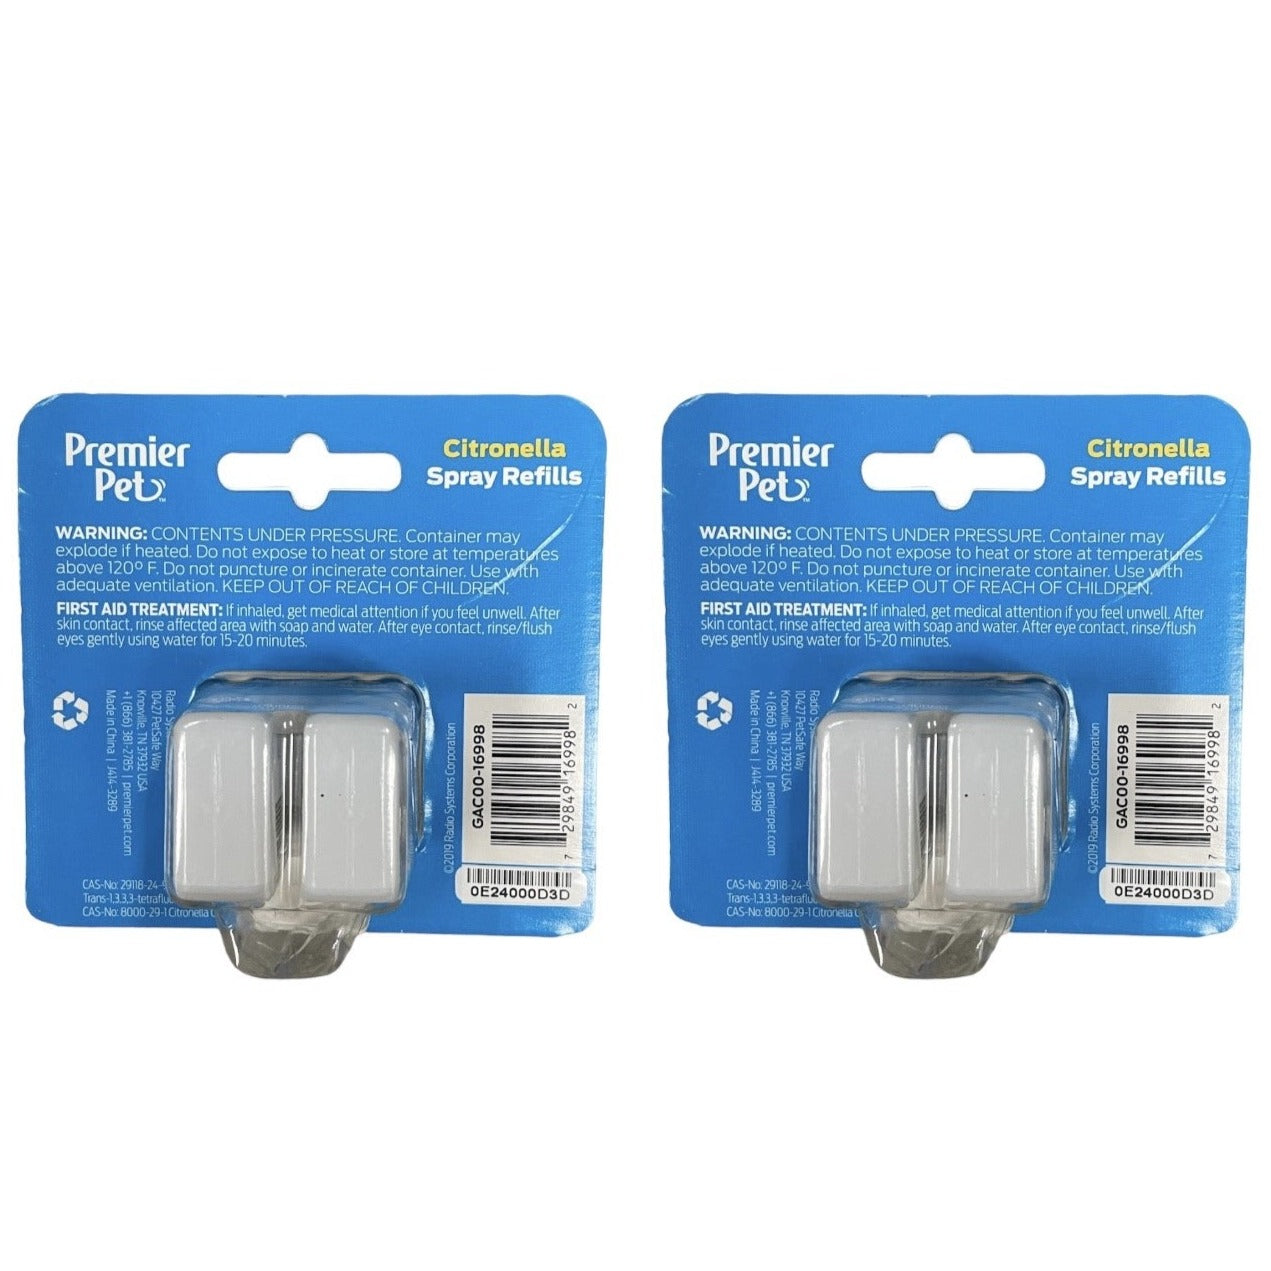 Premier Pet Spray Citronella Refill Replacement Cartridges For Spray Bark Collar, 2 Count Per Pack - 2 Packs (4 Cartridges Total)